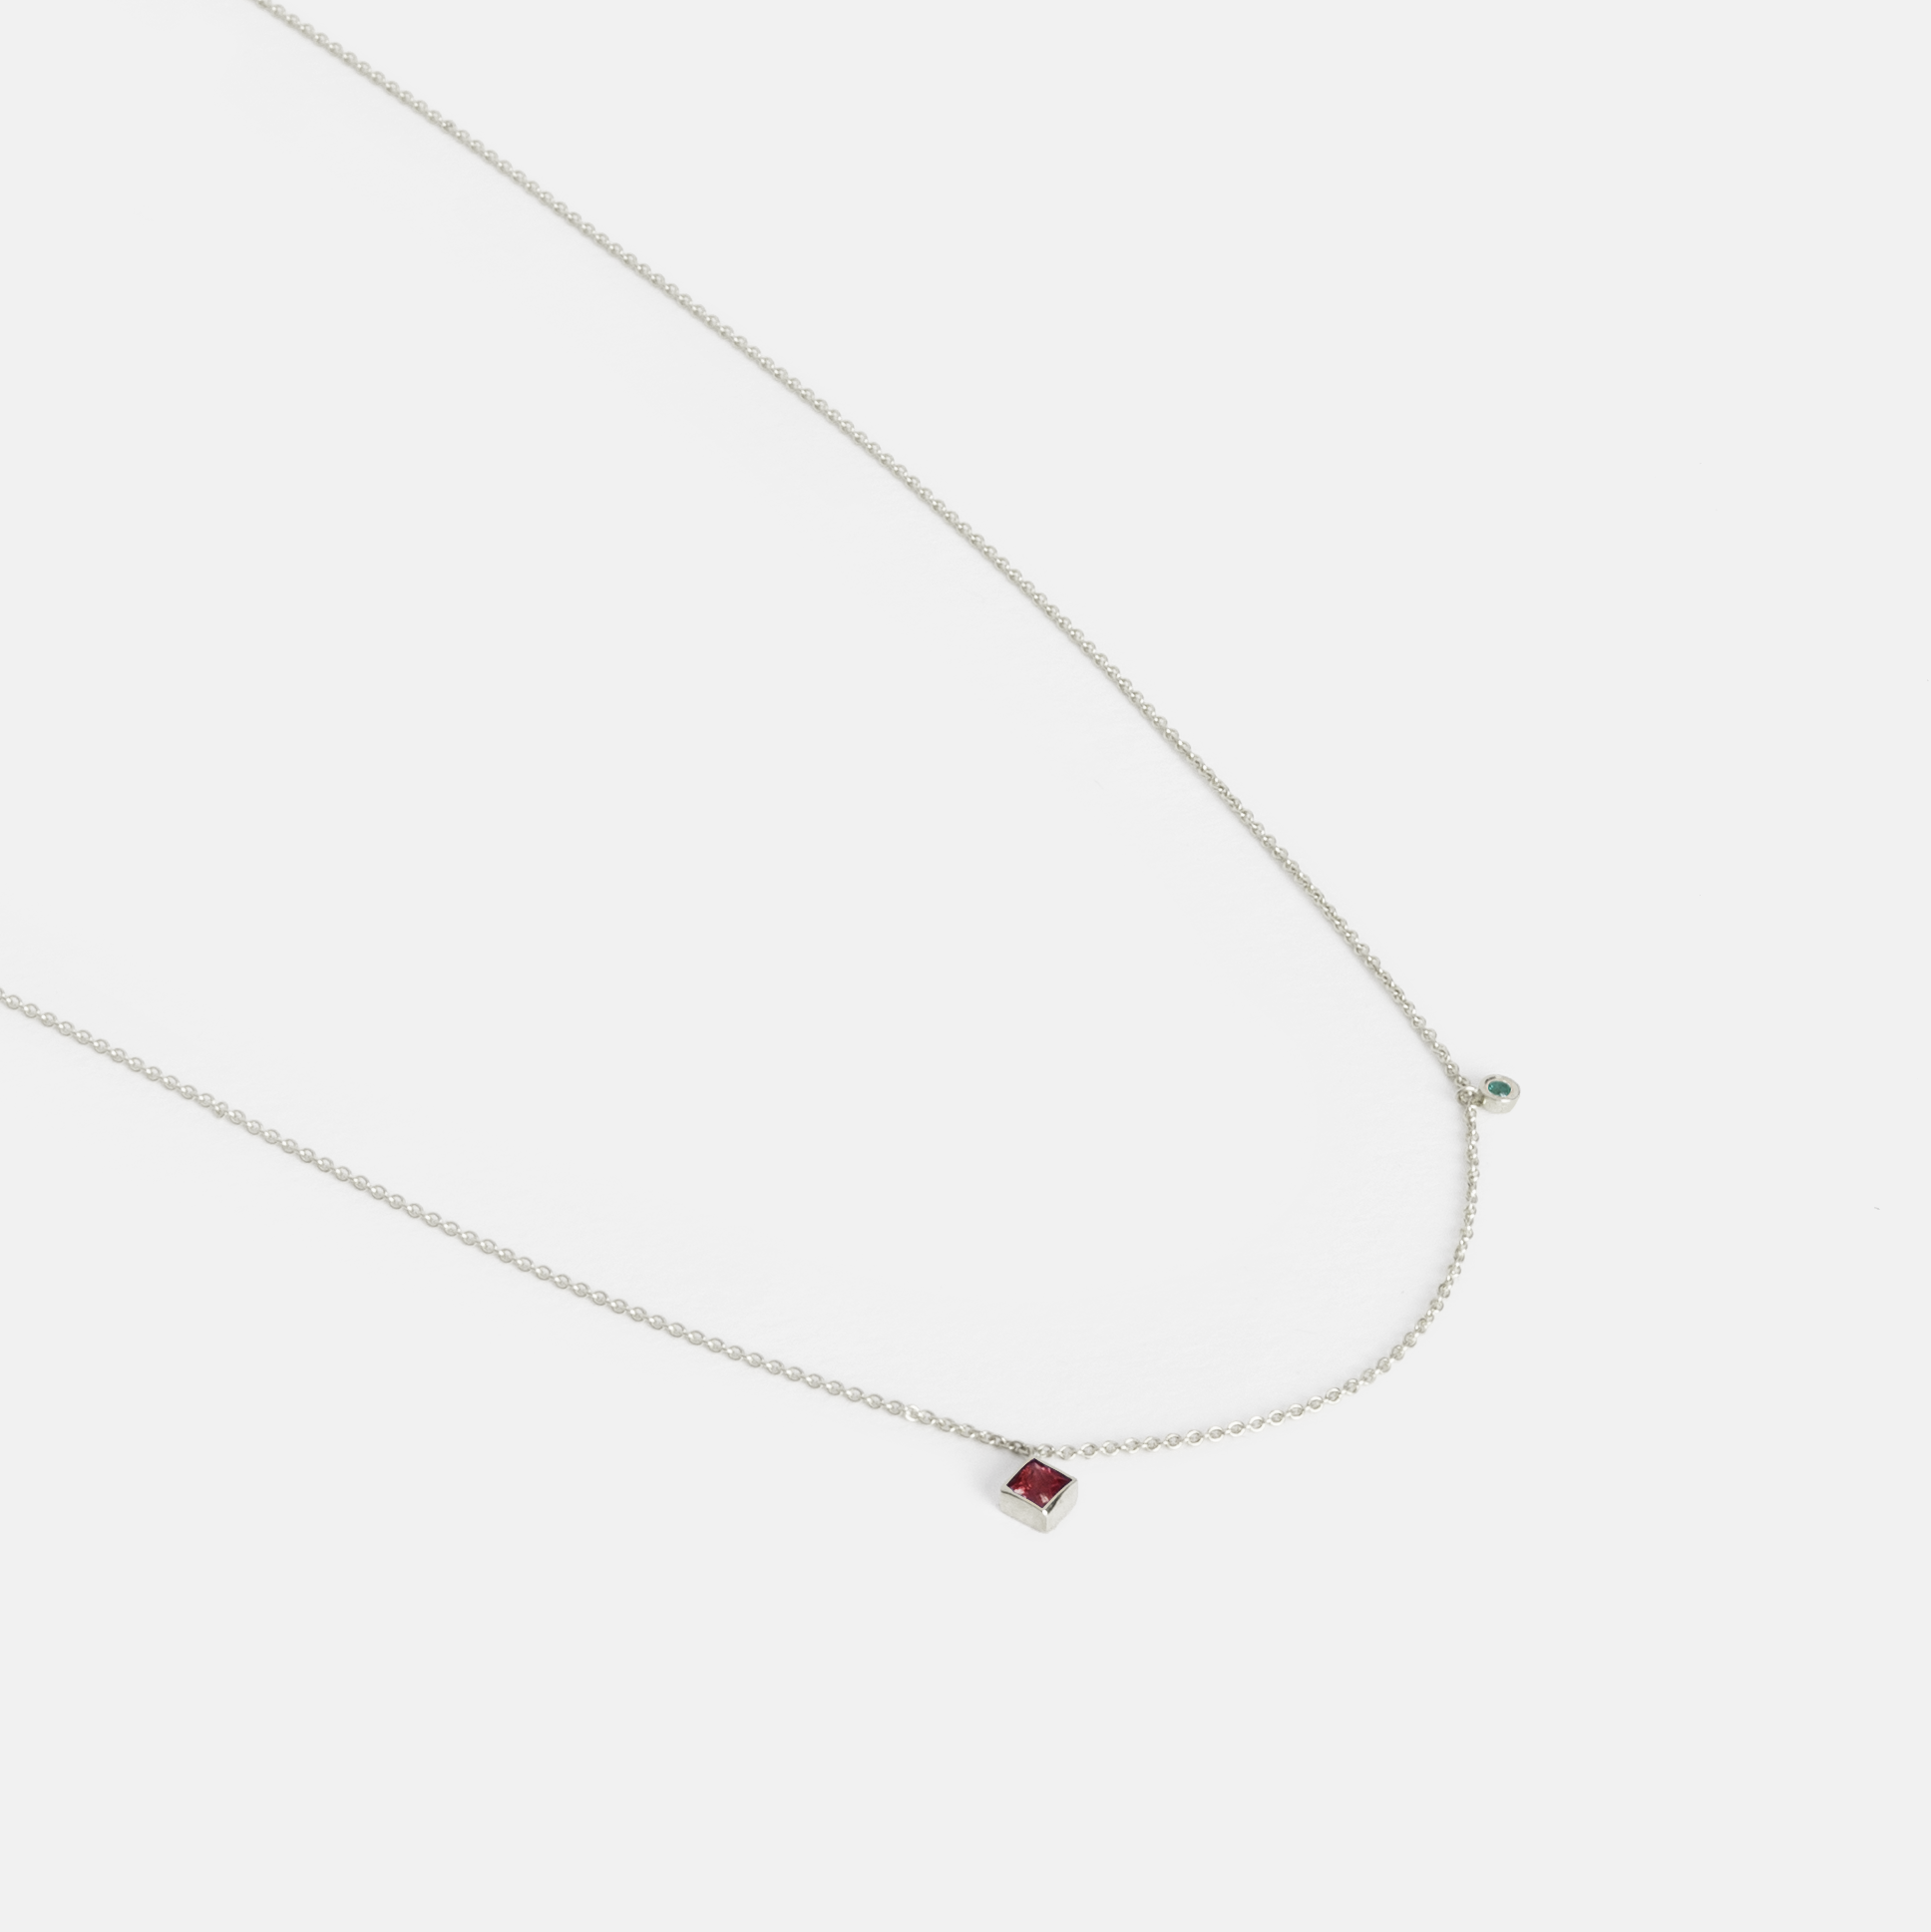  Ibi Thin Necklace in 14k White Gold set with Emerald and Ruby By SHW Fine Jewelry NYC